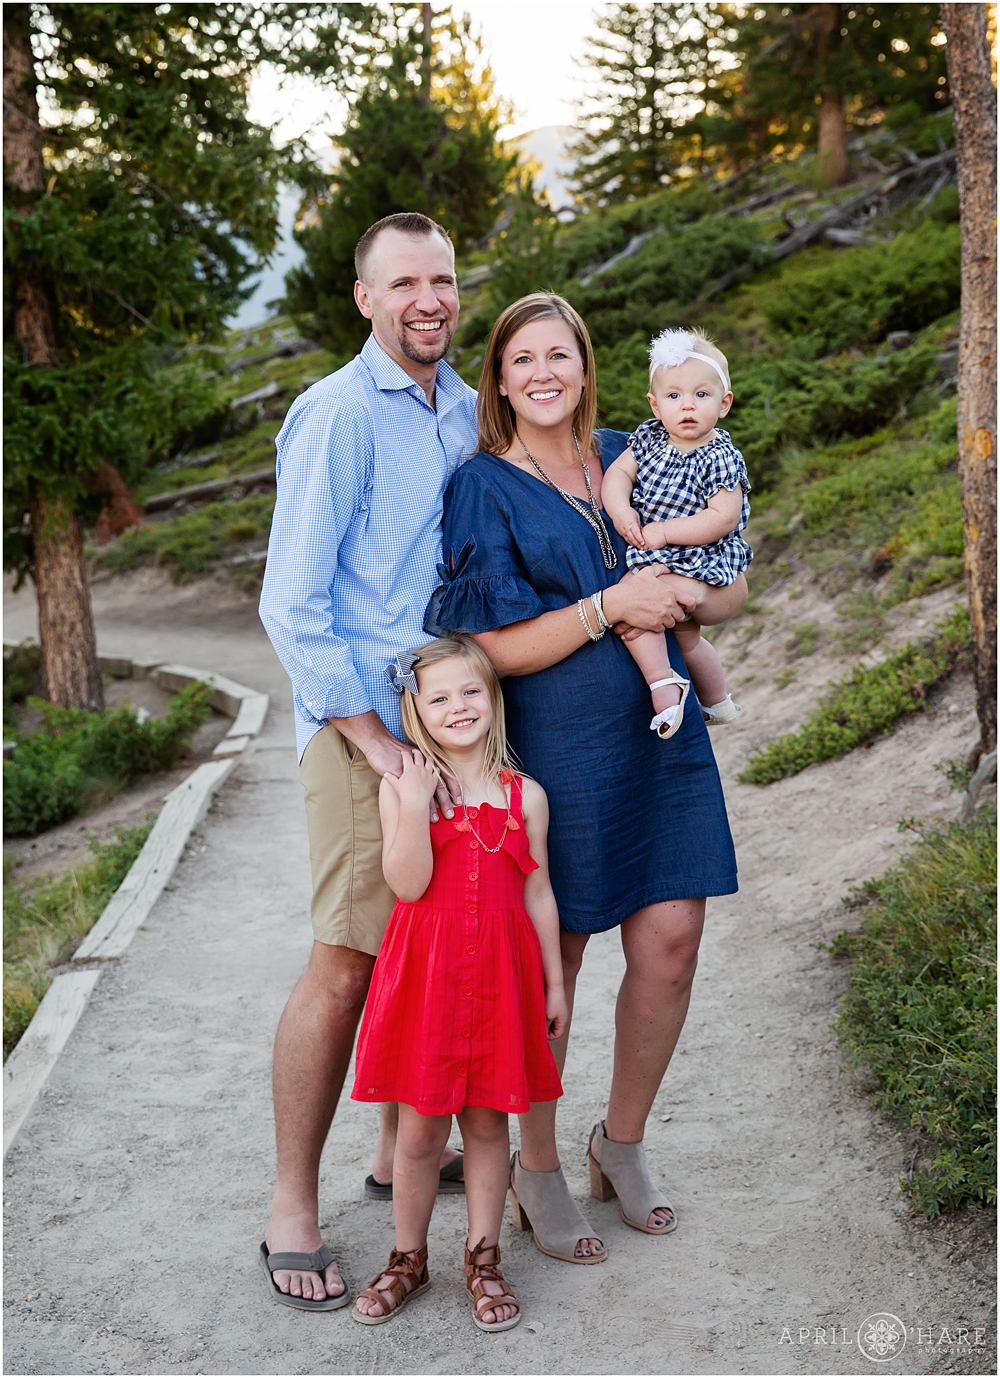 A mom and dad with their two young daughters at their outdoor Colorado family photography session at Sapphire Point